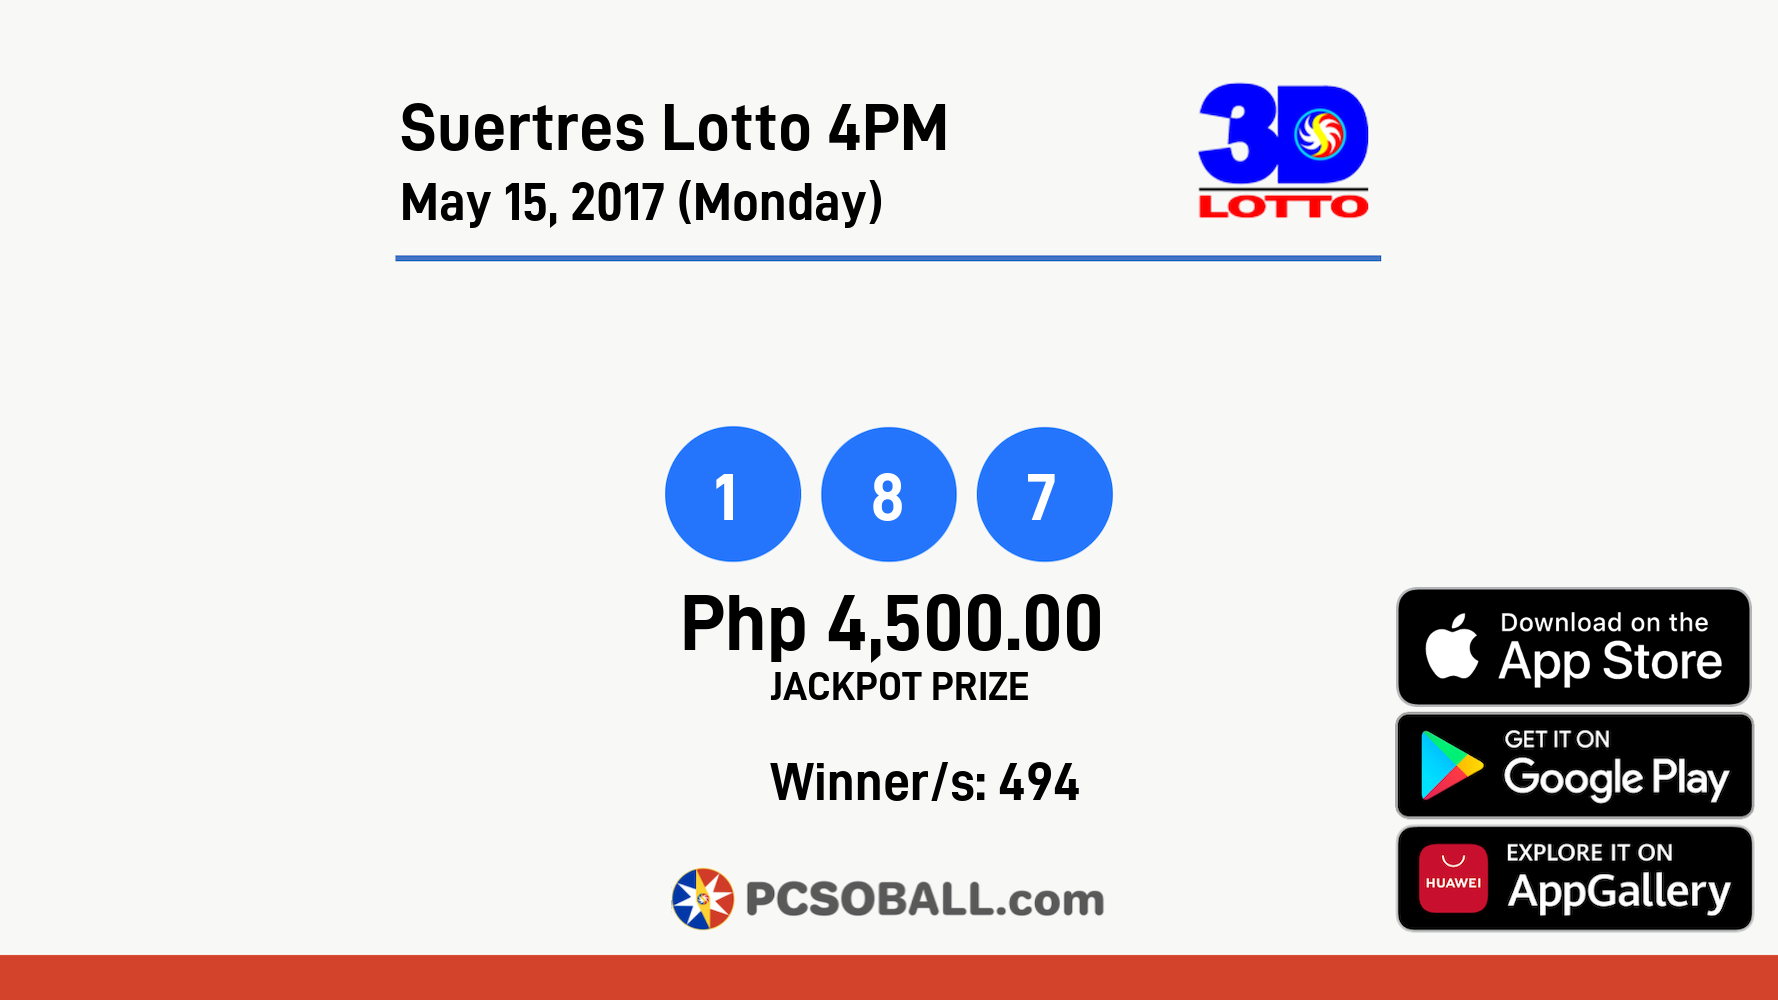 Suertres Lotto 4PM May 15, 2017 (Monday) Result